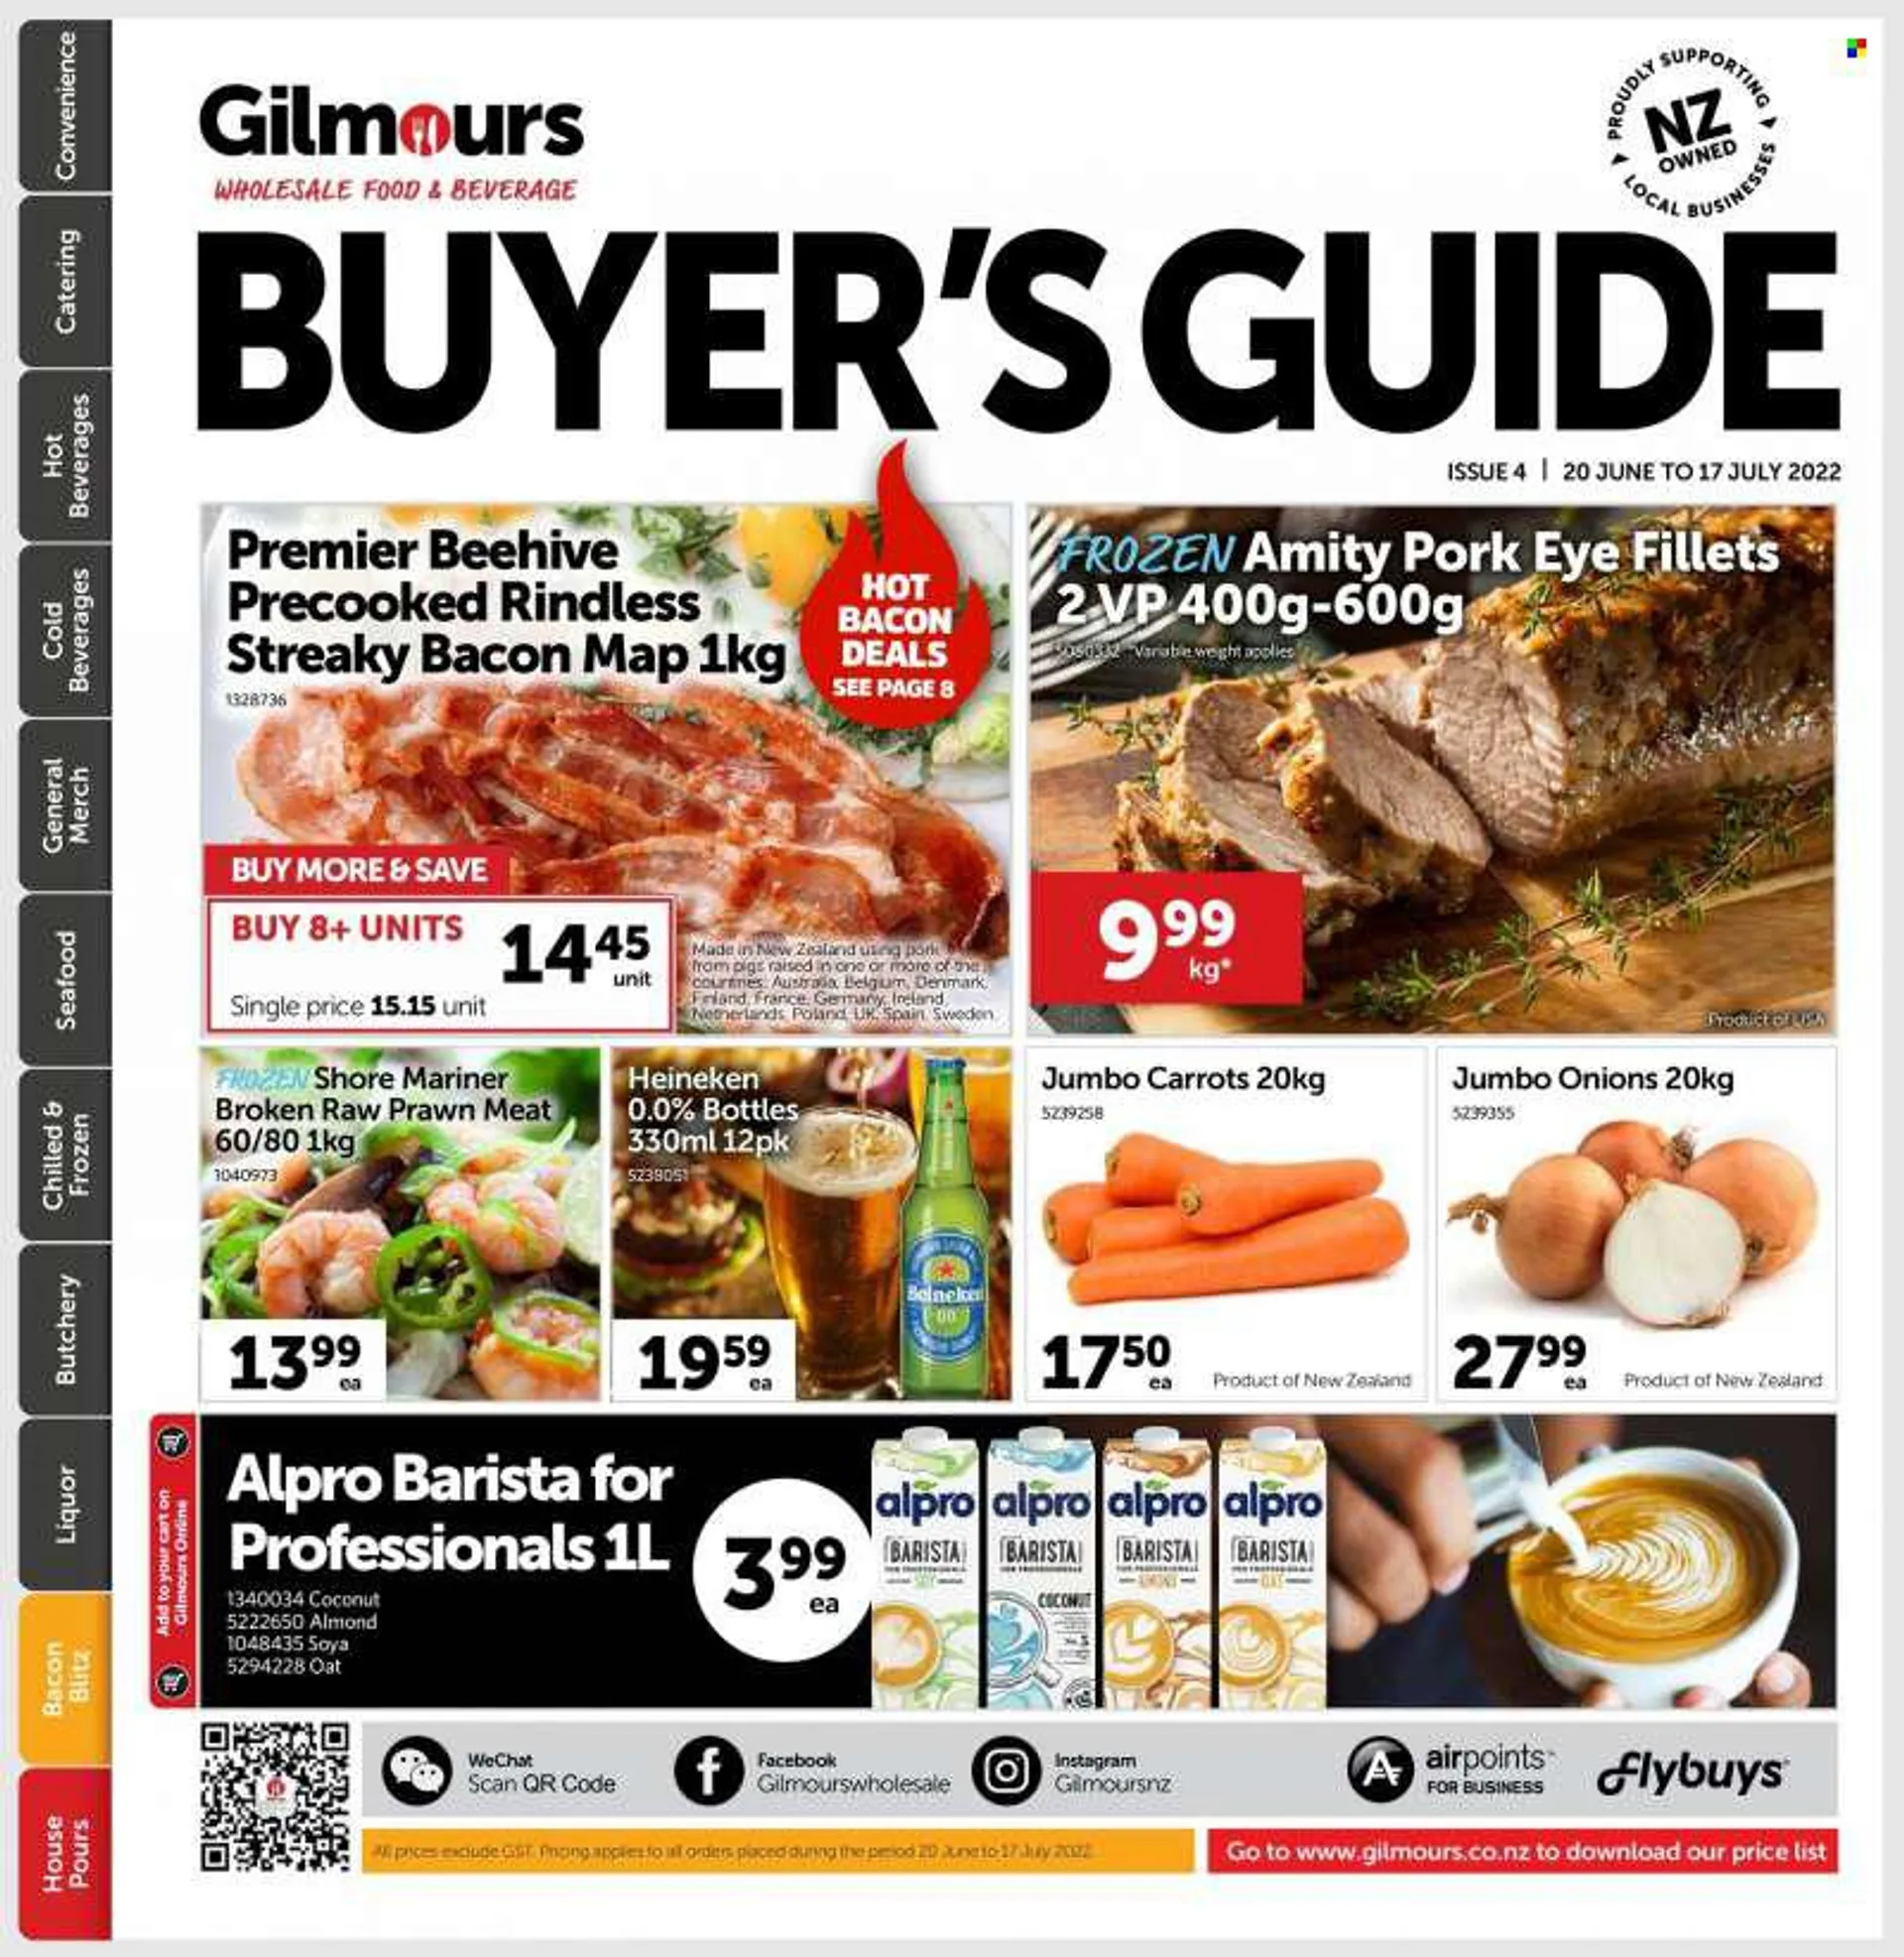 Gilmours mailer - 20.06.2022 - 17.07.2022 - Sales products - carrots, onion, coconut, seafood, prawns, Shore Mariner, Alpro, bacon, streaky bacon, oats, liquor, beer, Heineken. Page 1.